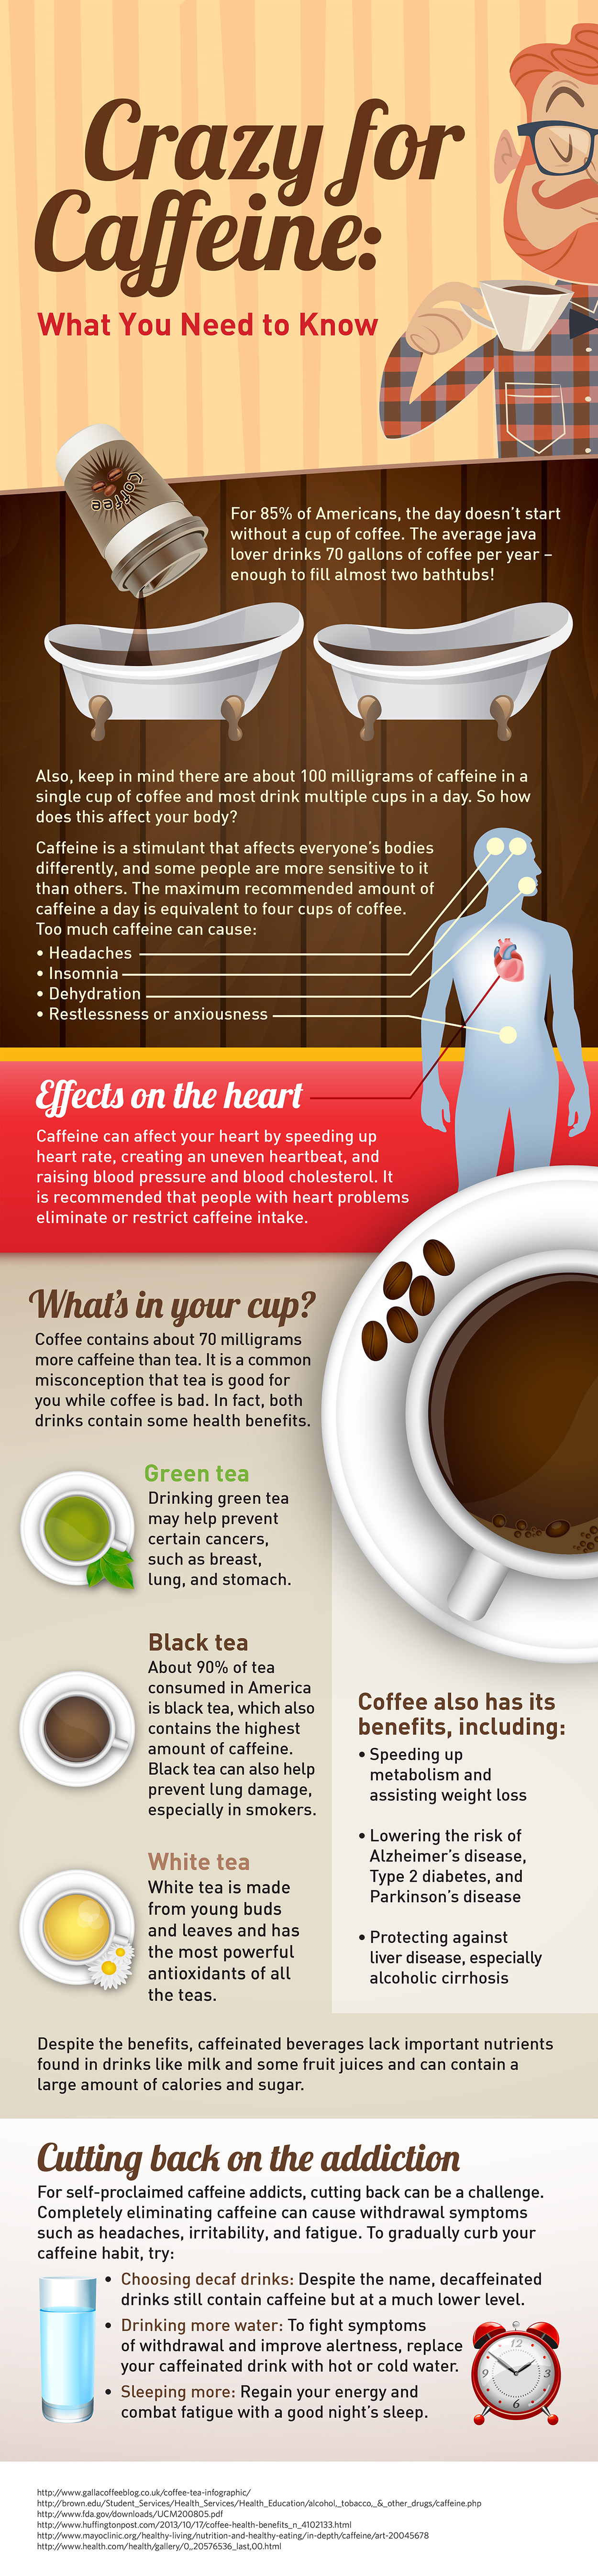 Infographic: Caffeine Facts and Statistics